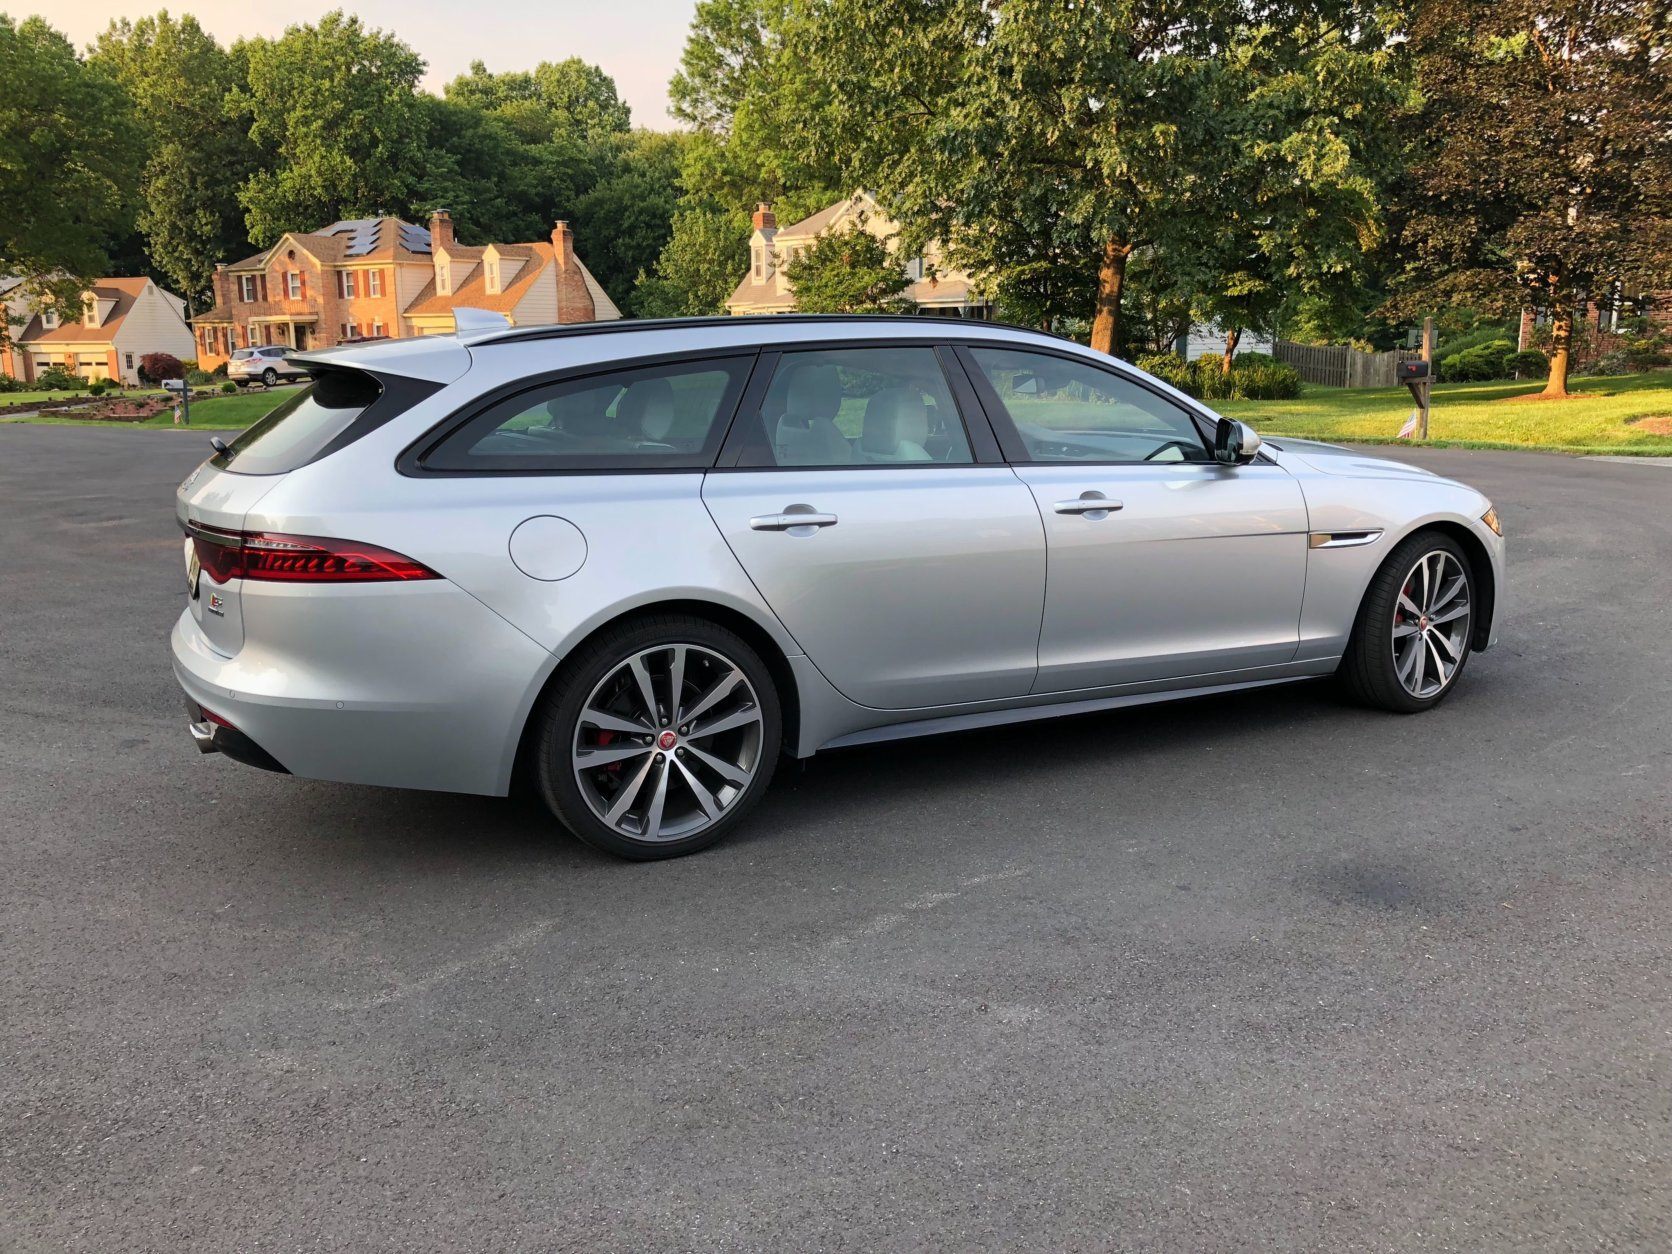 “Stylish” and “wagon” aren’t usually used together, but WTOP Car Reviewer Mike Parris says the Jaguar Sportbrake S AWD will help change your mind. (WTOP/Mike Parris)